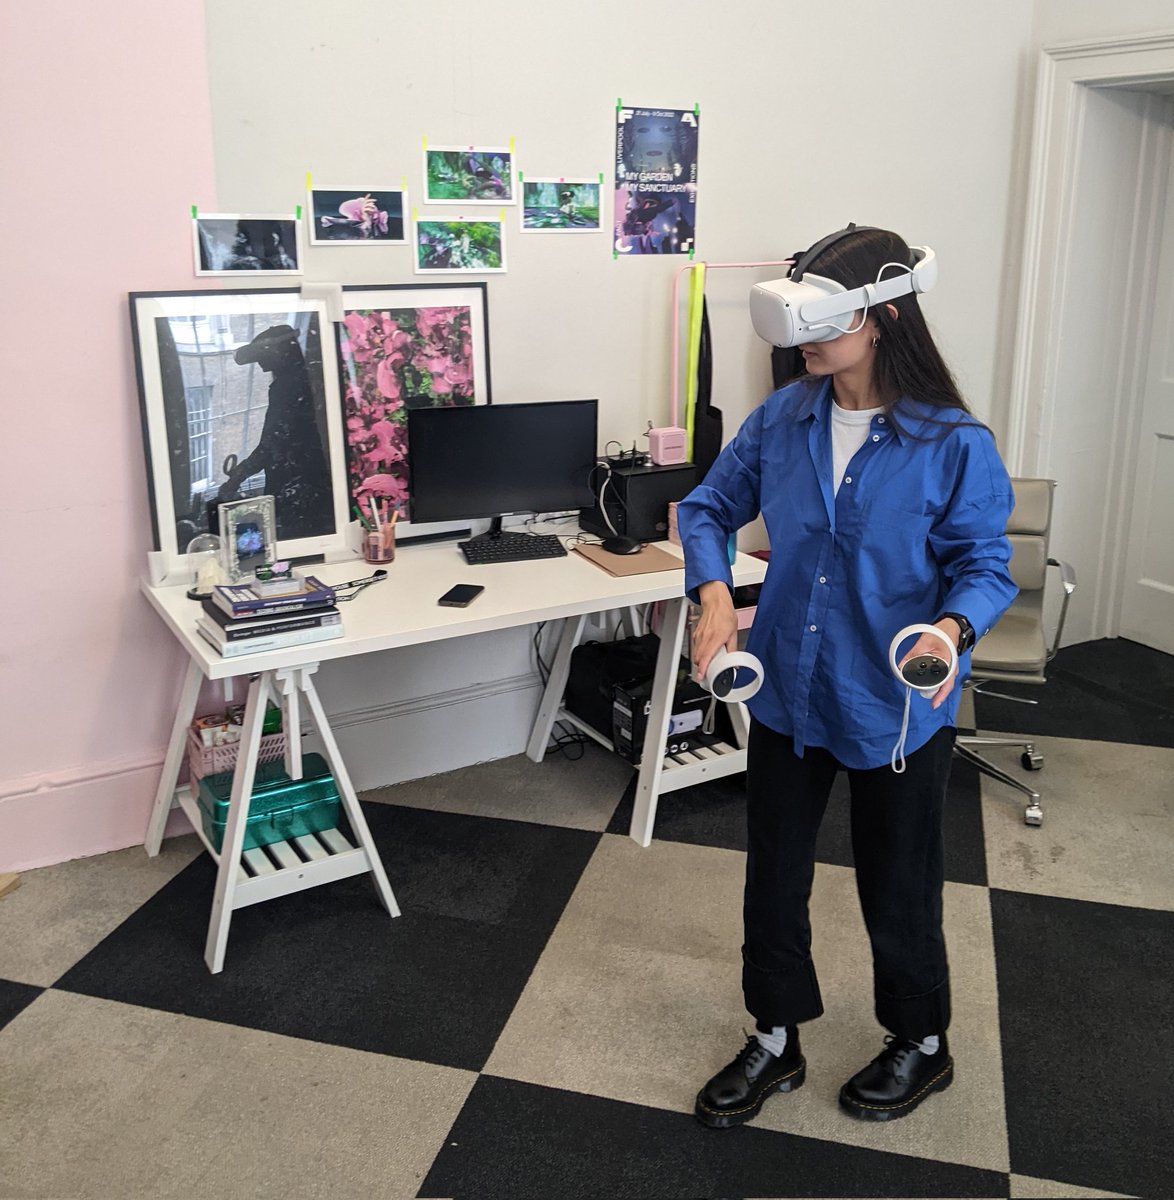 TB 🪷 It was a pleasure to visit artist @SianFan and show her our latest demo including her beautiful environment 🎮 #VR #vrartist #immersiveart #artisticjourney